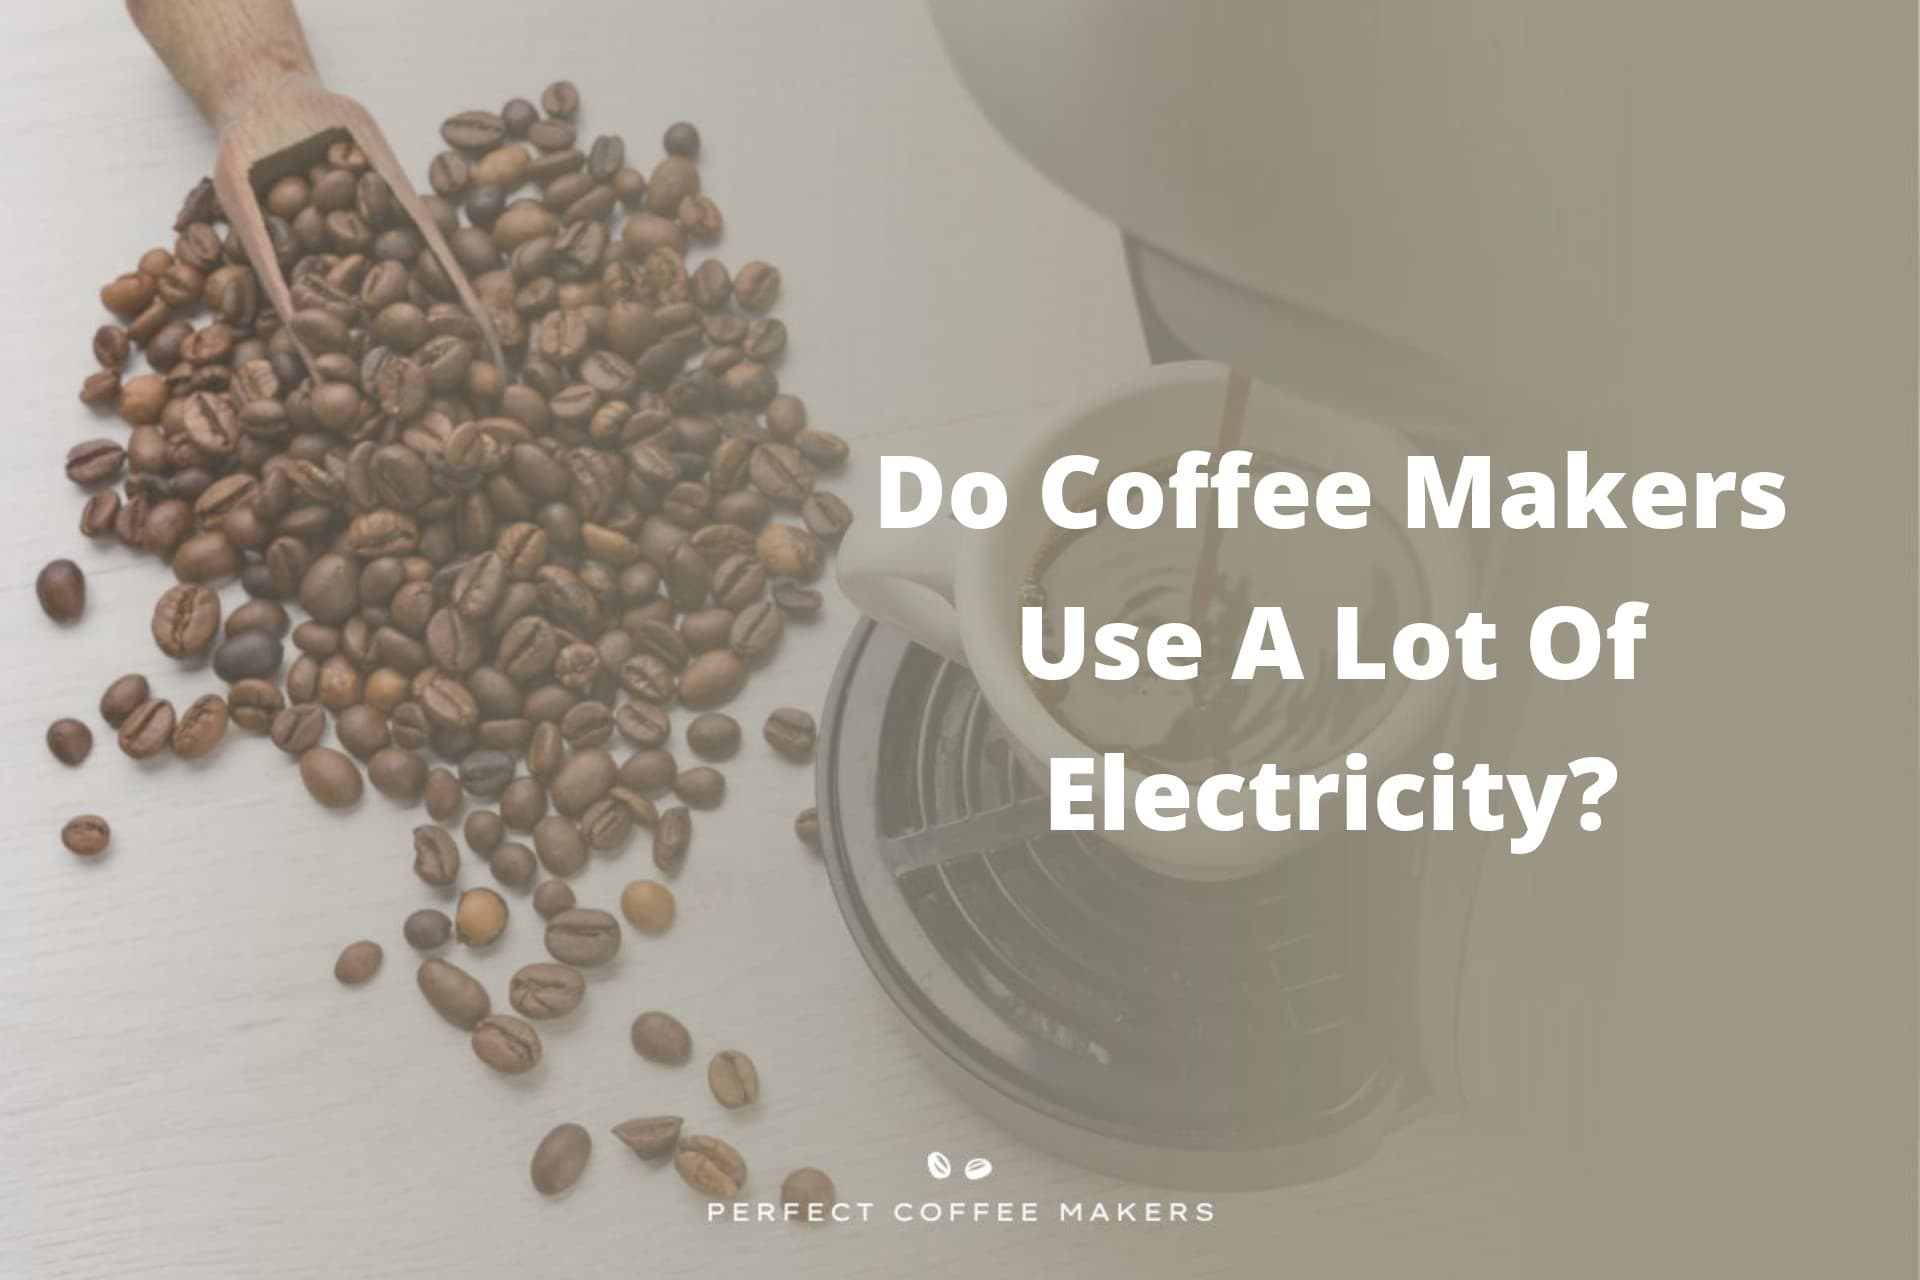 Do Coffee Makers Use A Lot Of Electricity